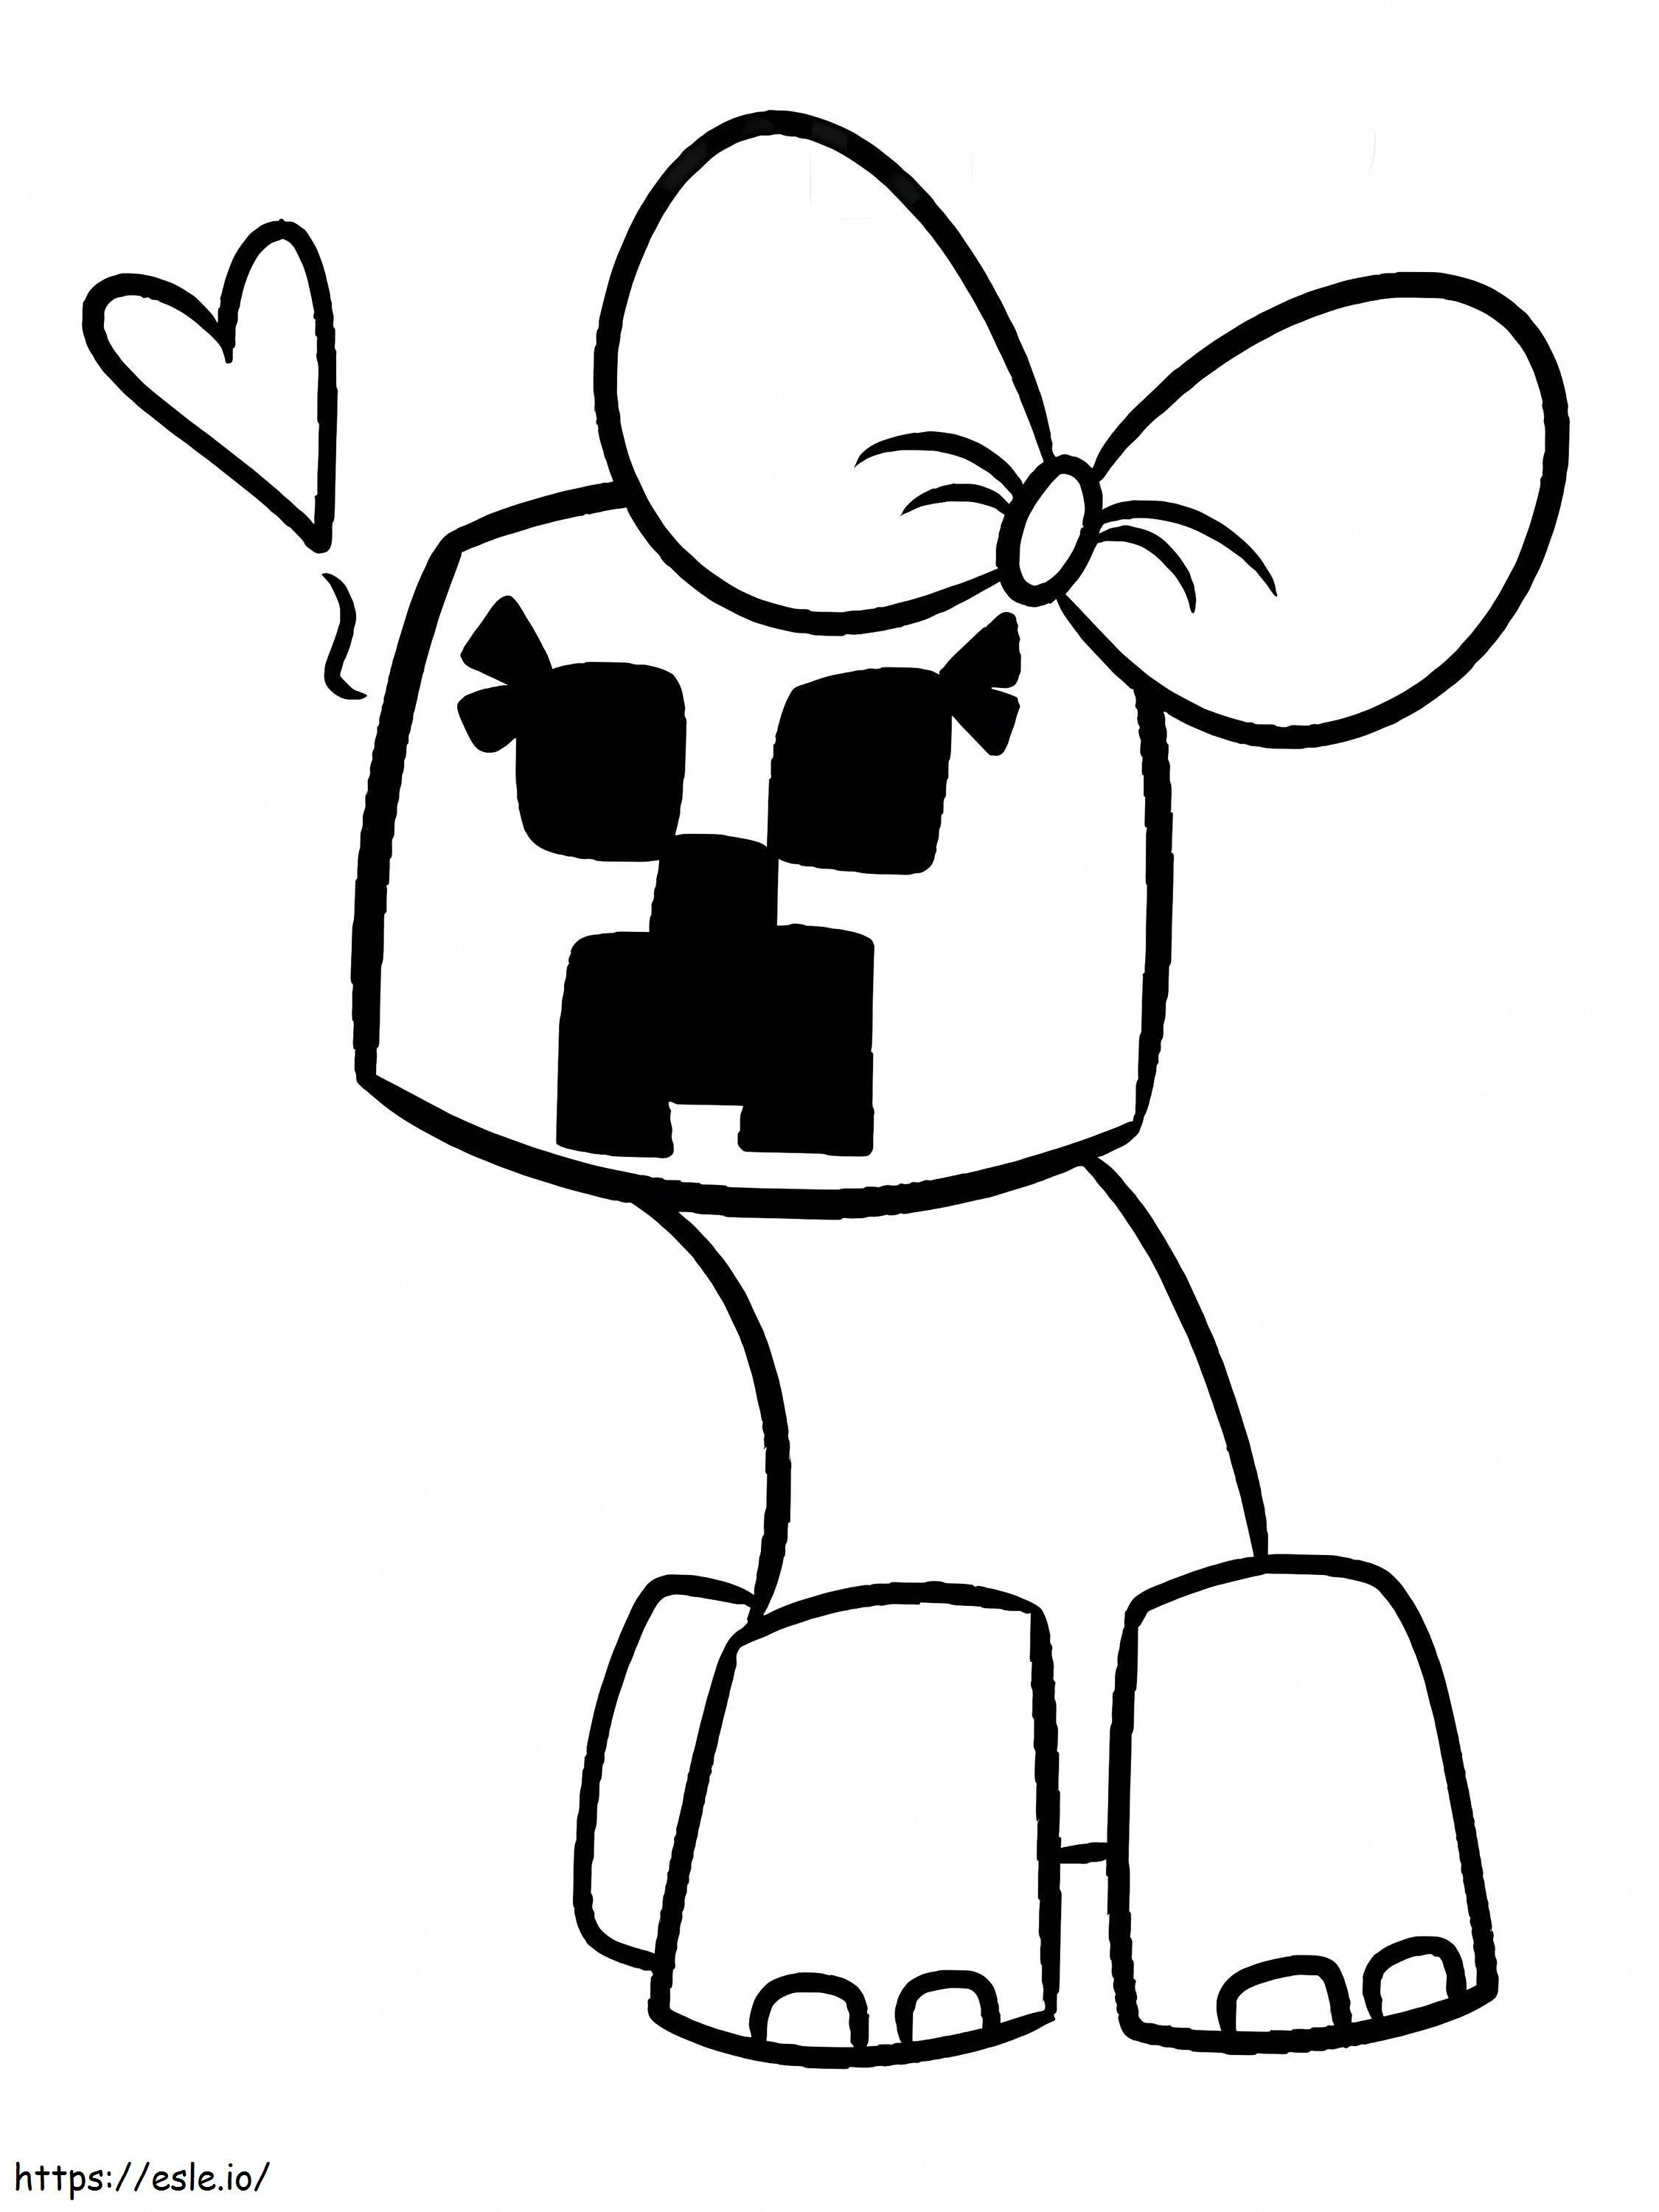 Cute Minecraft Creeper coloring page